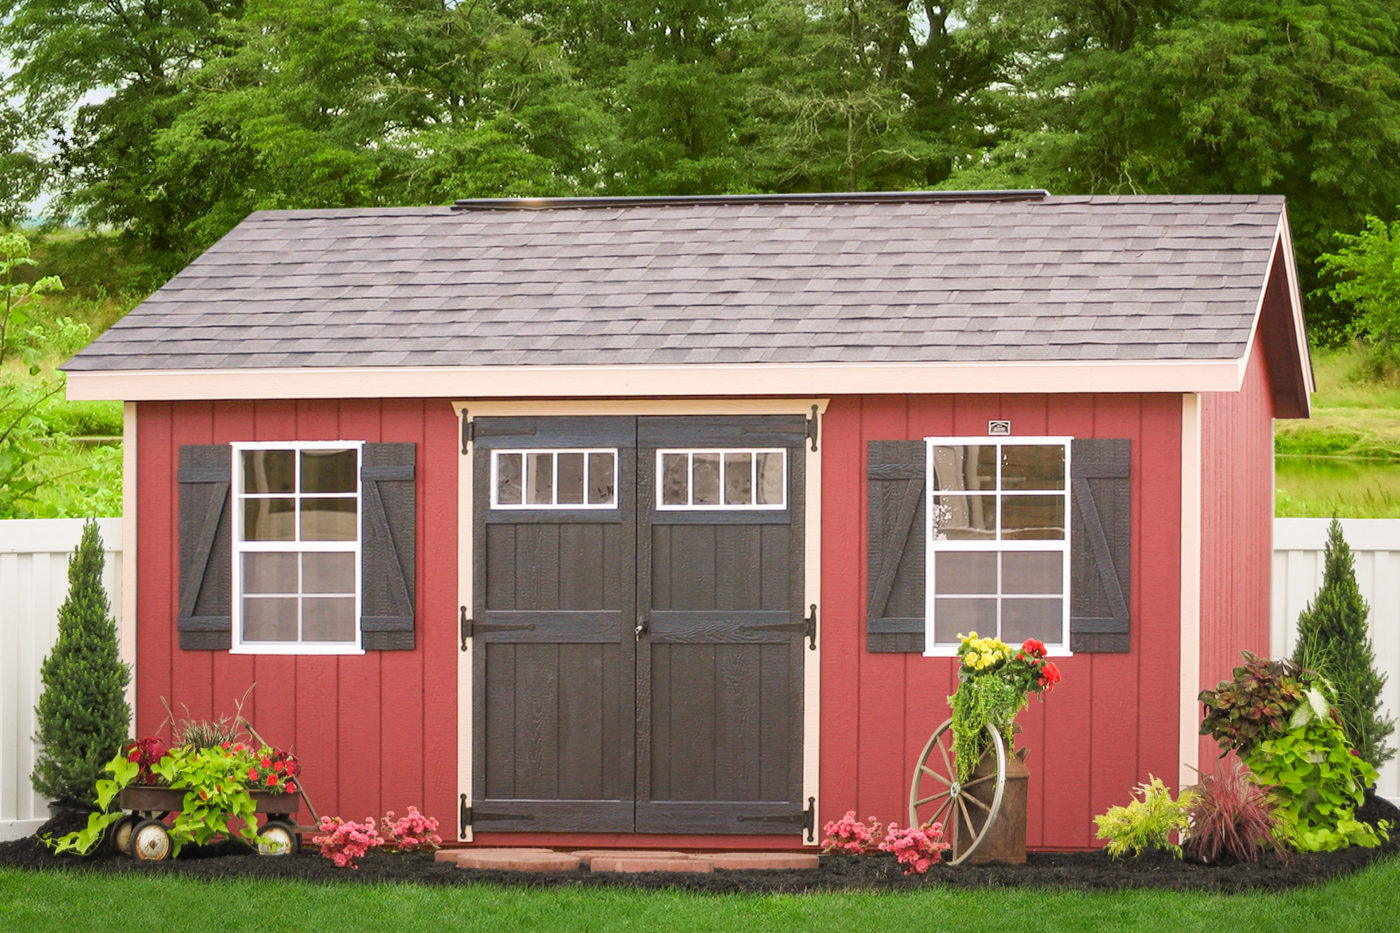 A storage shed kit with wood siding